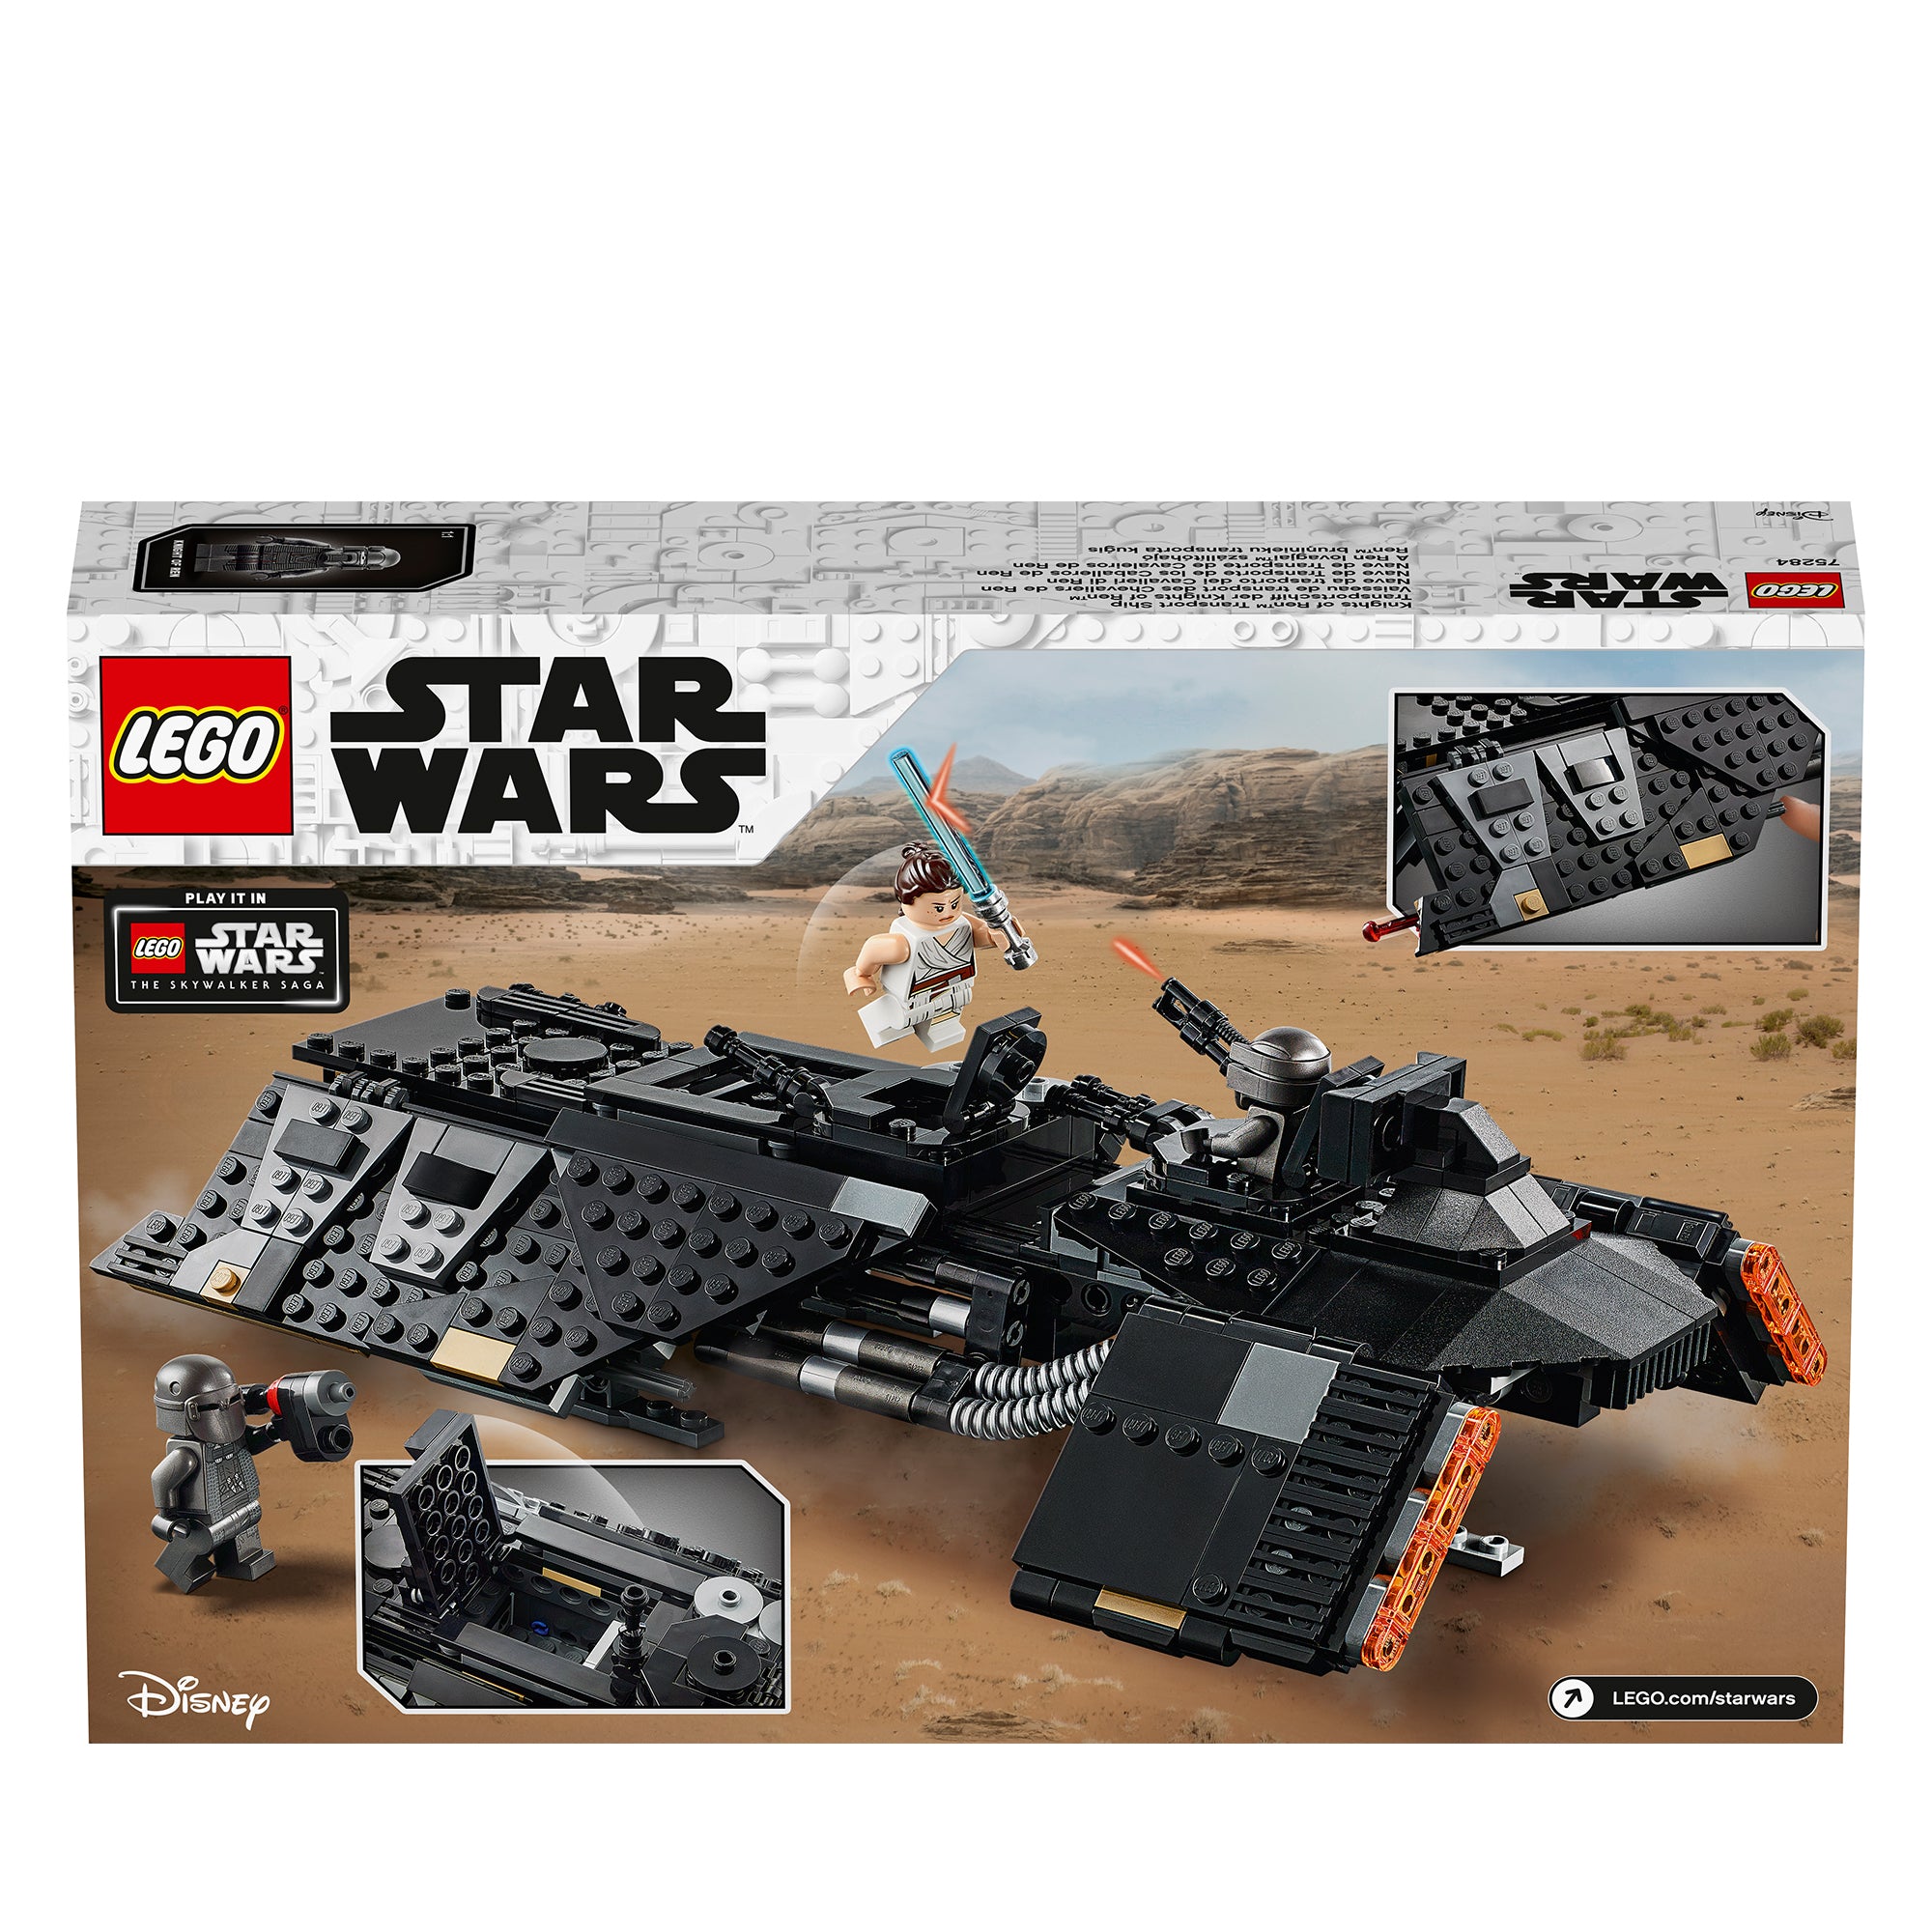 LEGO Star Wars: The Rise of Skywalker Knights of Ren Transport Ship 75284  Spacecraft Set, Features Knights of Ren and Rey Minifigures to Role-Play